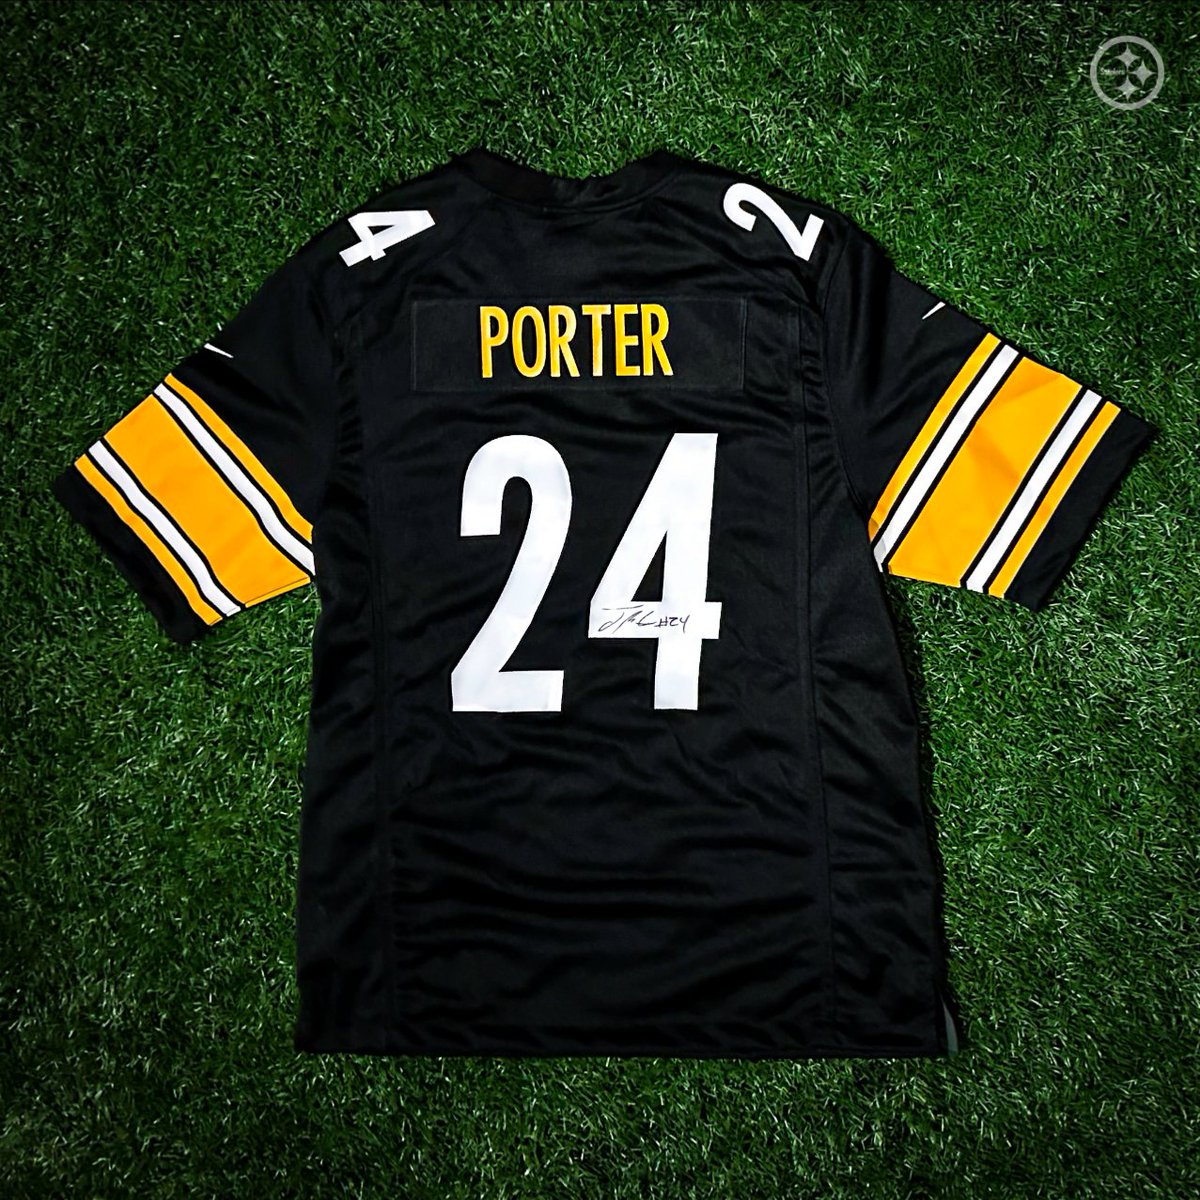 2️⃣4️⃣ giveaway on 2️⃣/4️⃣ RP for a chance to win this signed @JoeyPorterJr jersey!